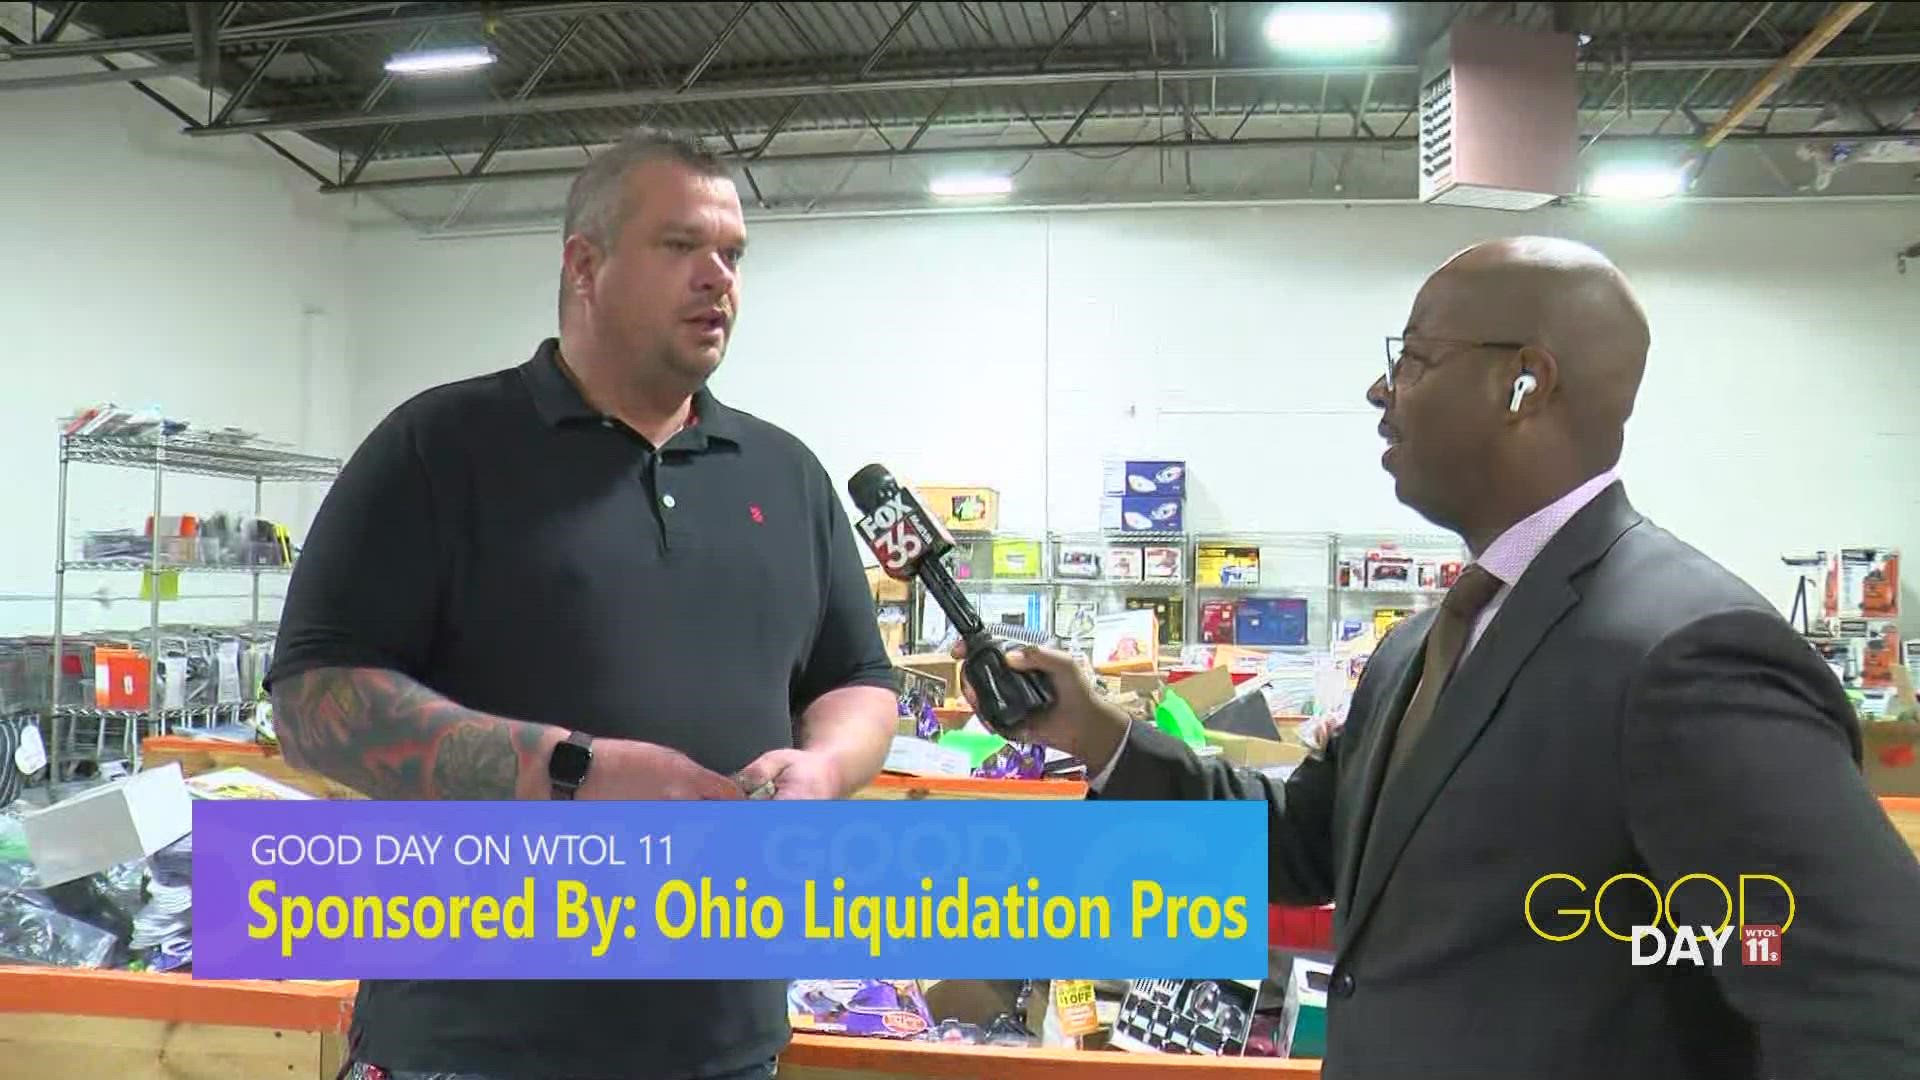 Mike Daigneault from Ohio Liquidation Pros talks about the great deals to be had at their Maumee location.